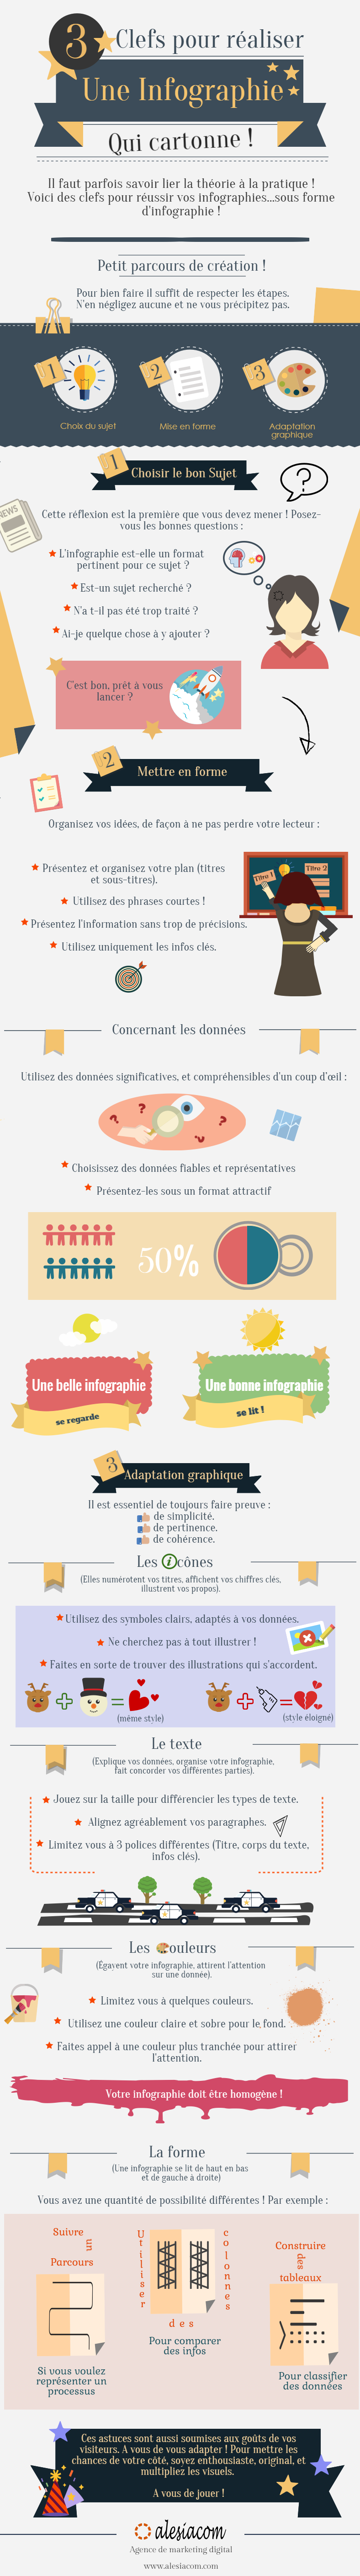 Top infographie